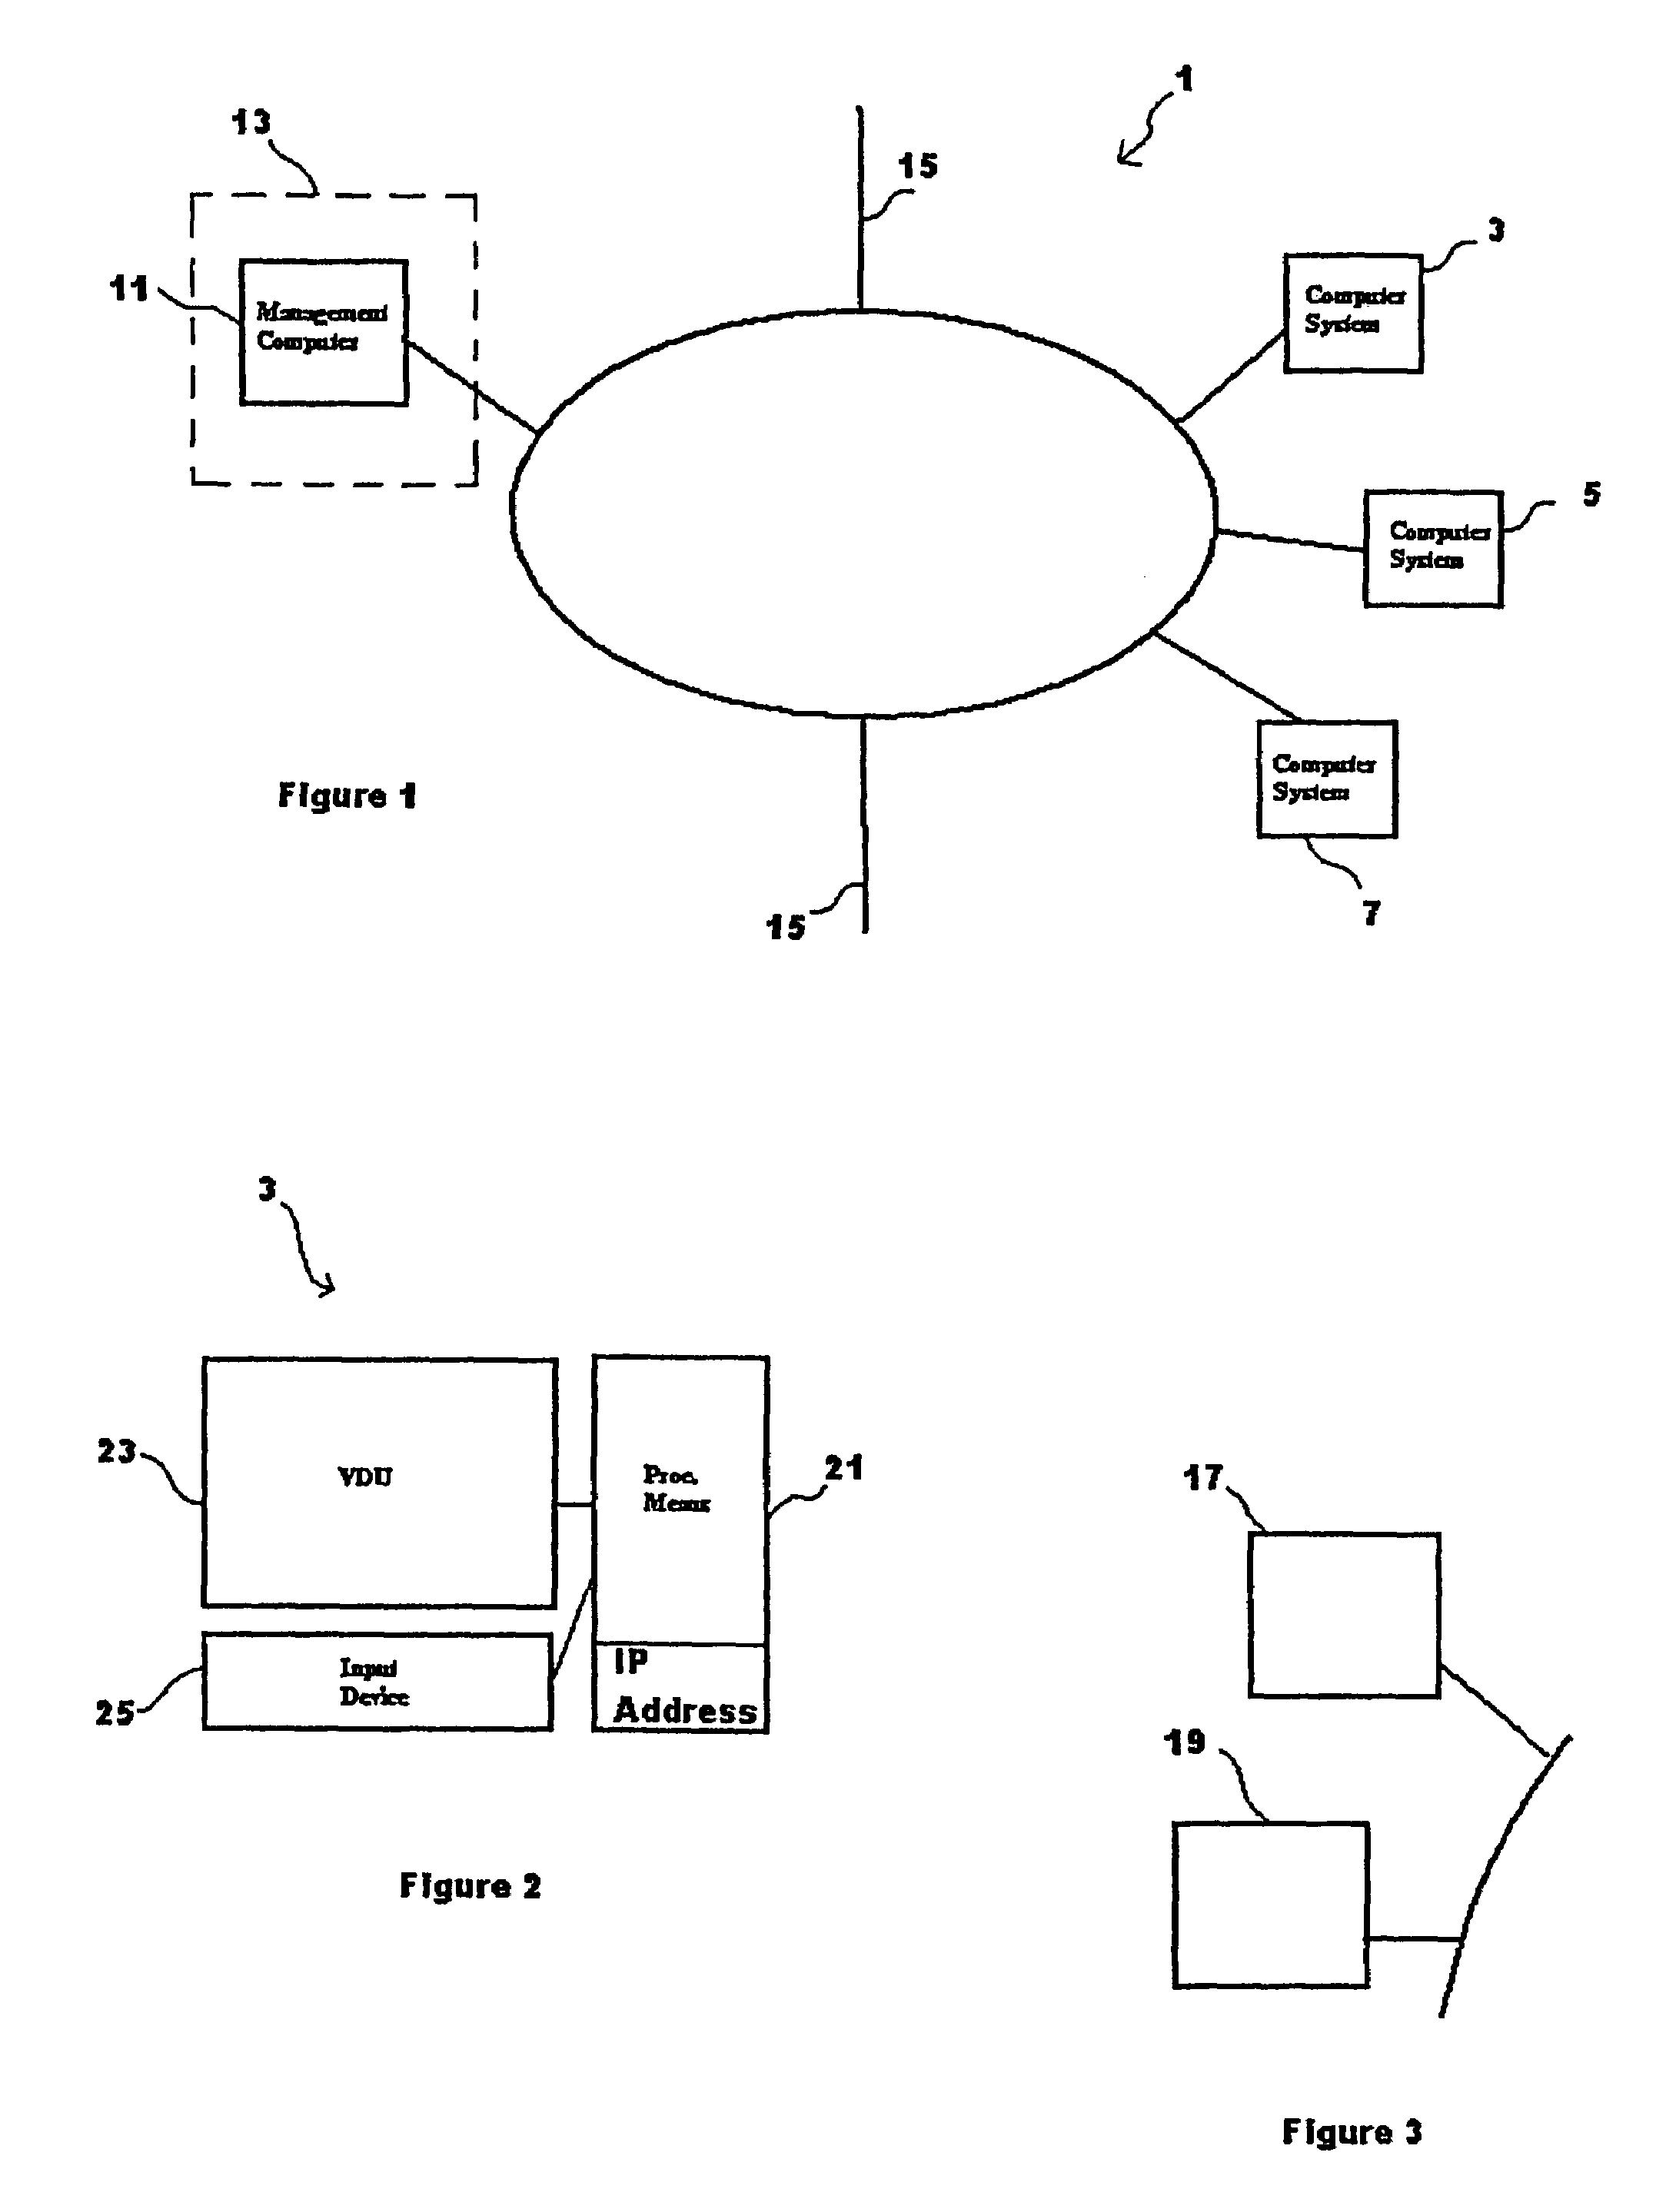 Signal level propagation mechanism for distribution of a payload to vulnerable systems